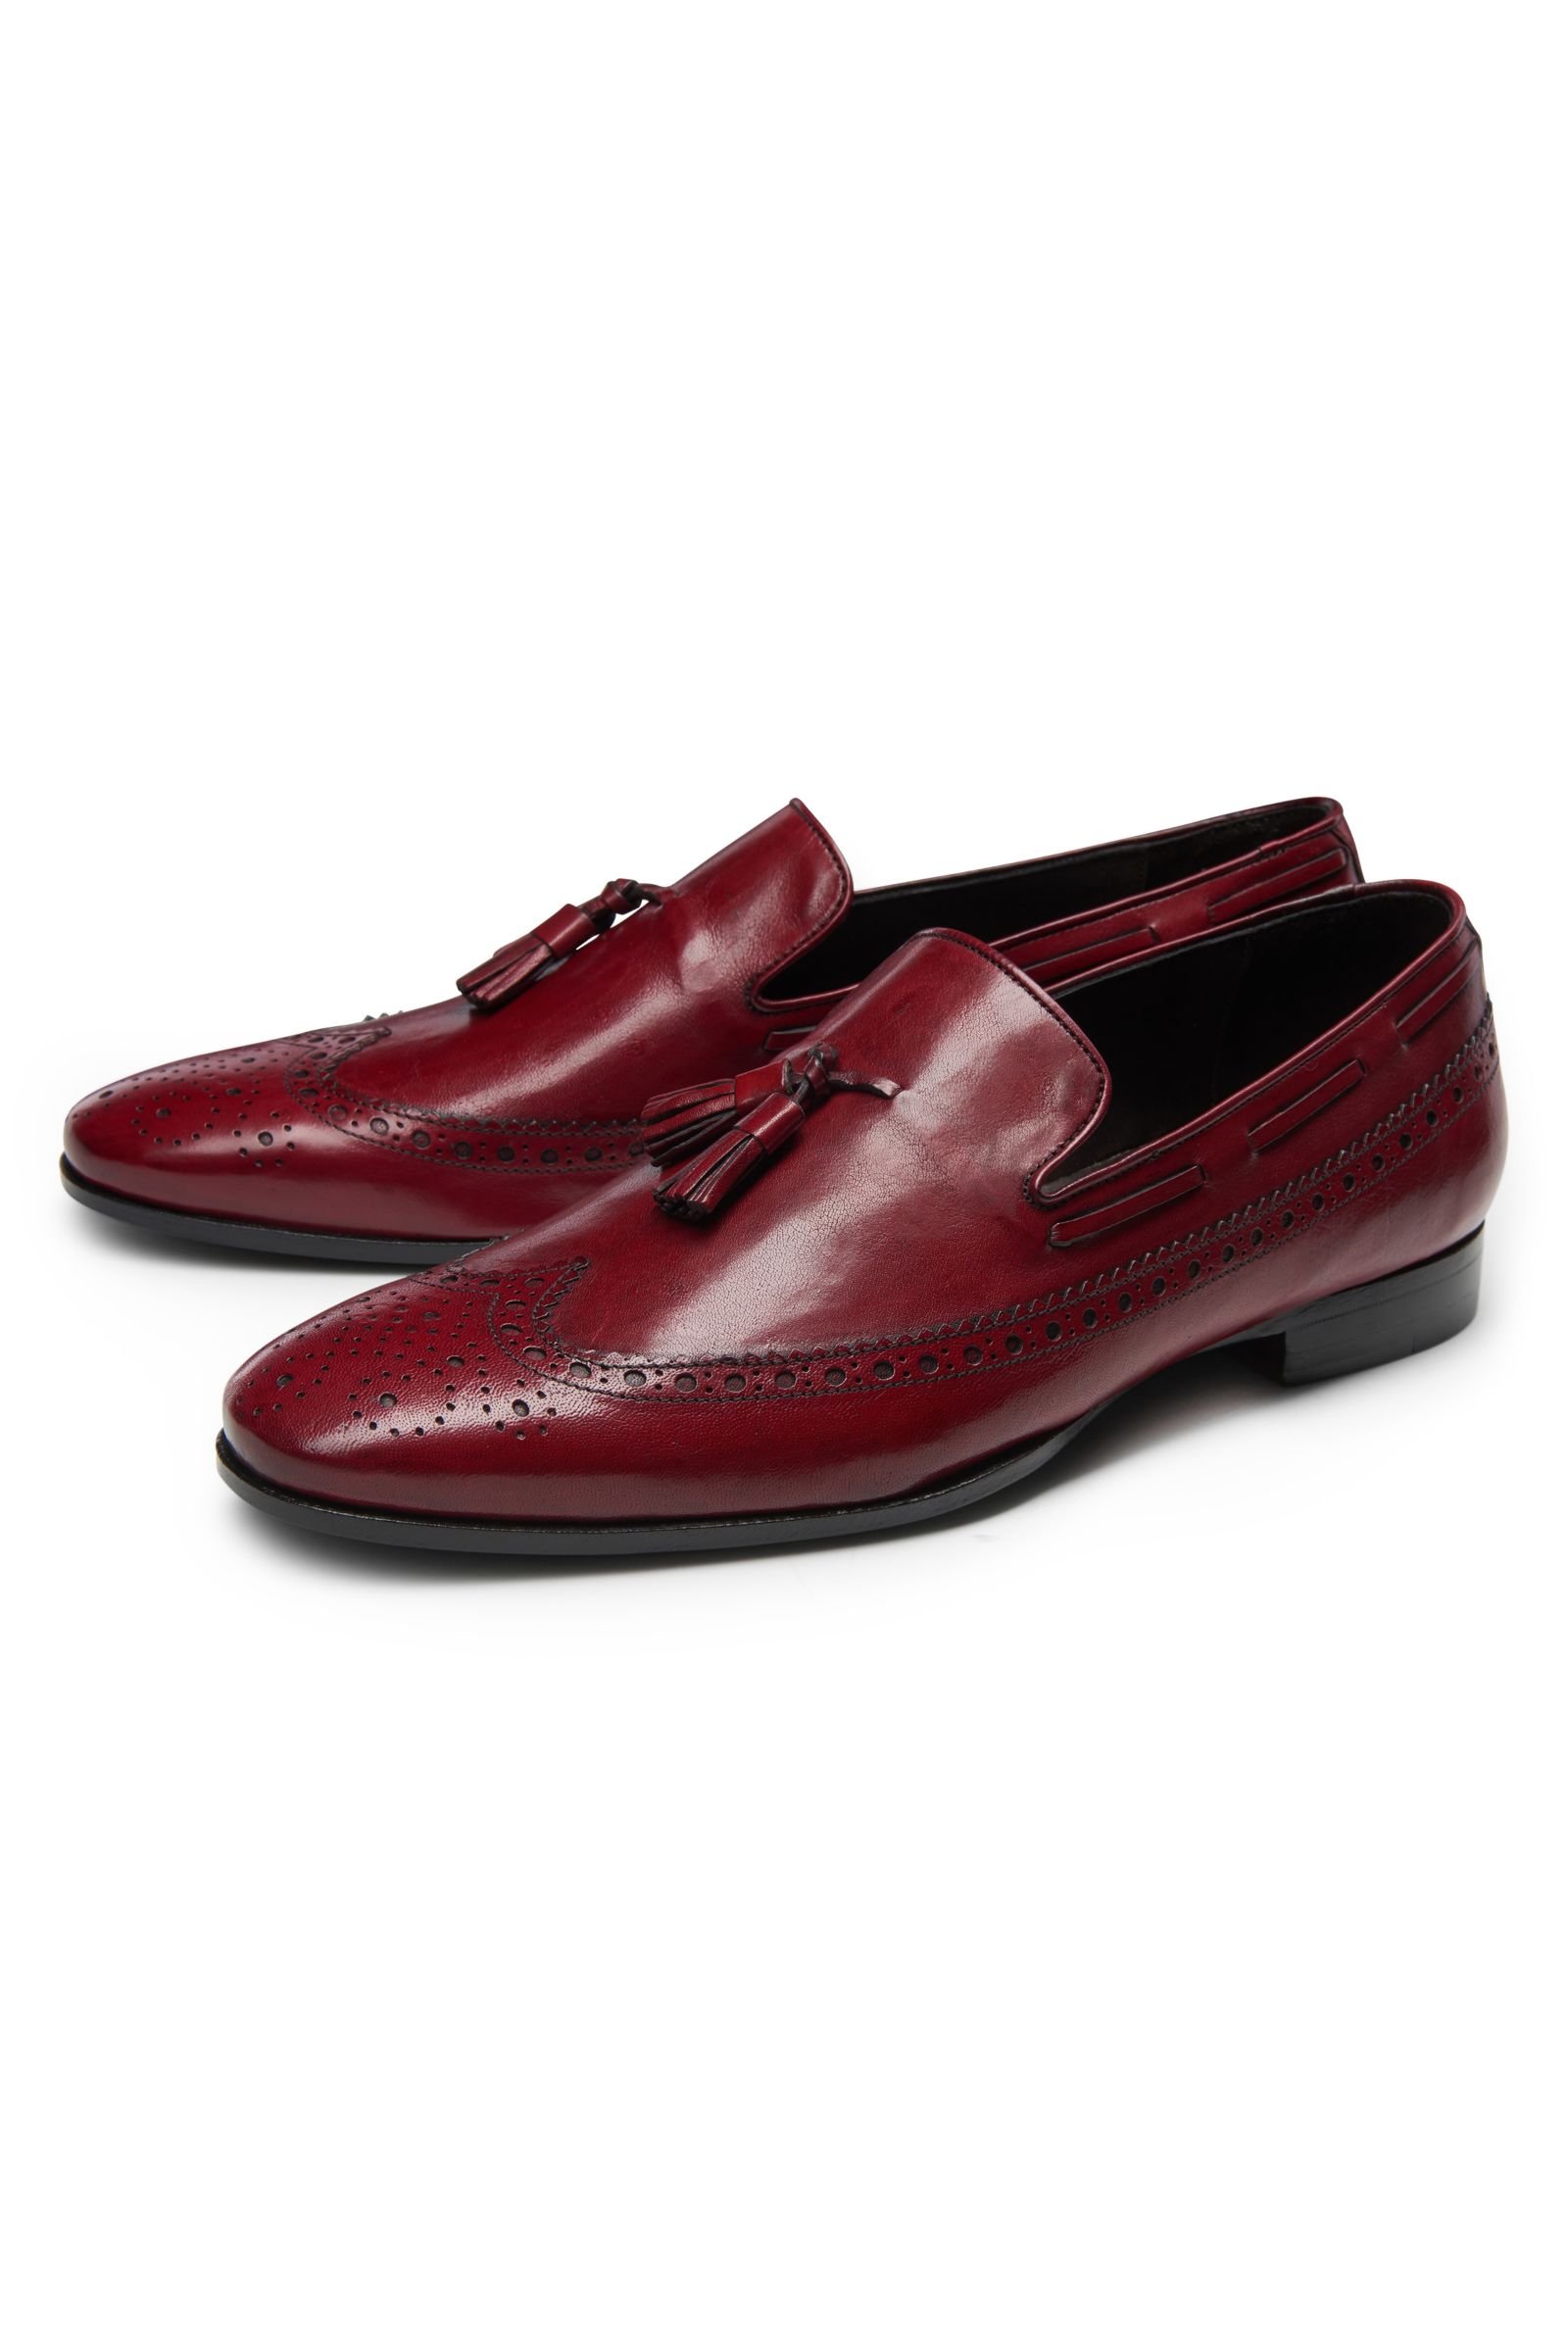 Tassel loafers 'Giglio' red